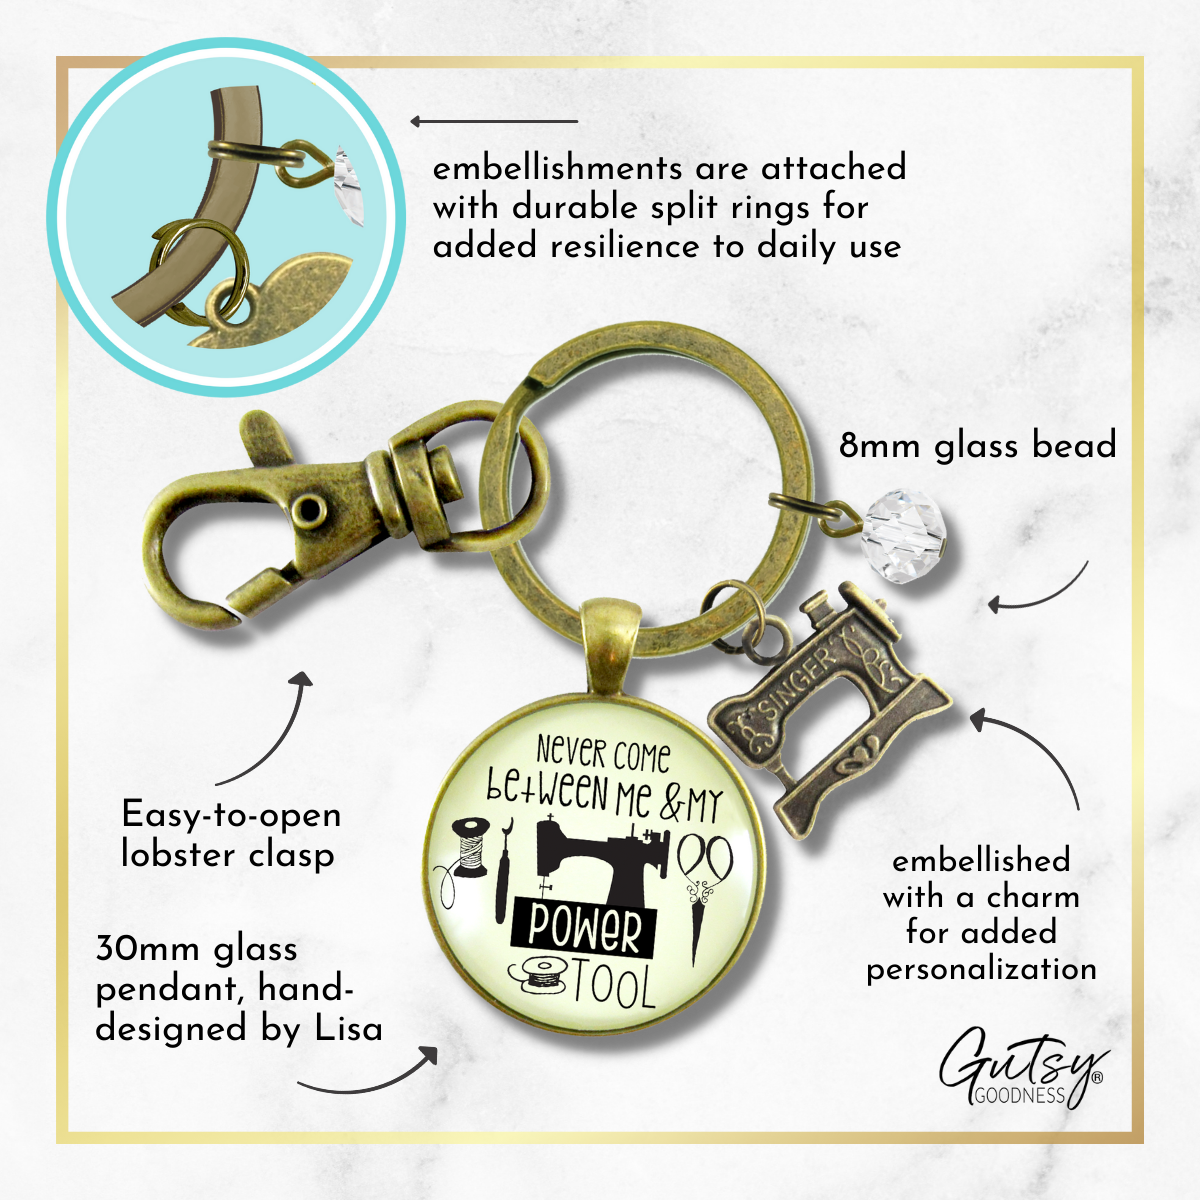 Seamstress Keychain Never Come Between My Powertool Fun Quote Womens Sewing Jewelry - Gutsy Goodness Handmade Jewelry;Seamstress Keychain Never Come Between My Powertool Fun Quote Womens Sewing Jewelry - Gutsy Goodness Handmade Jewelry Gifts